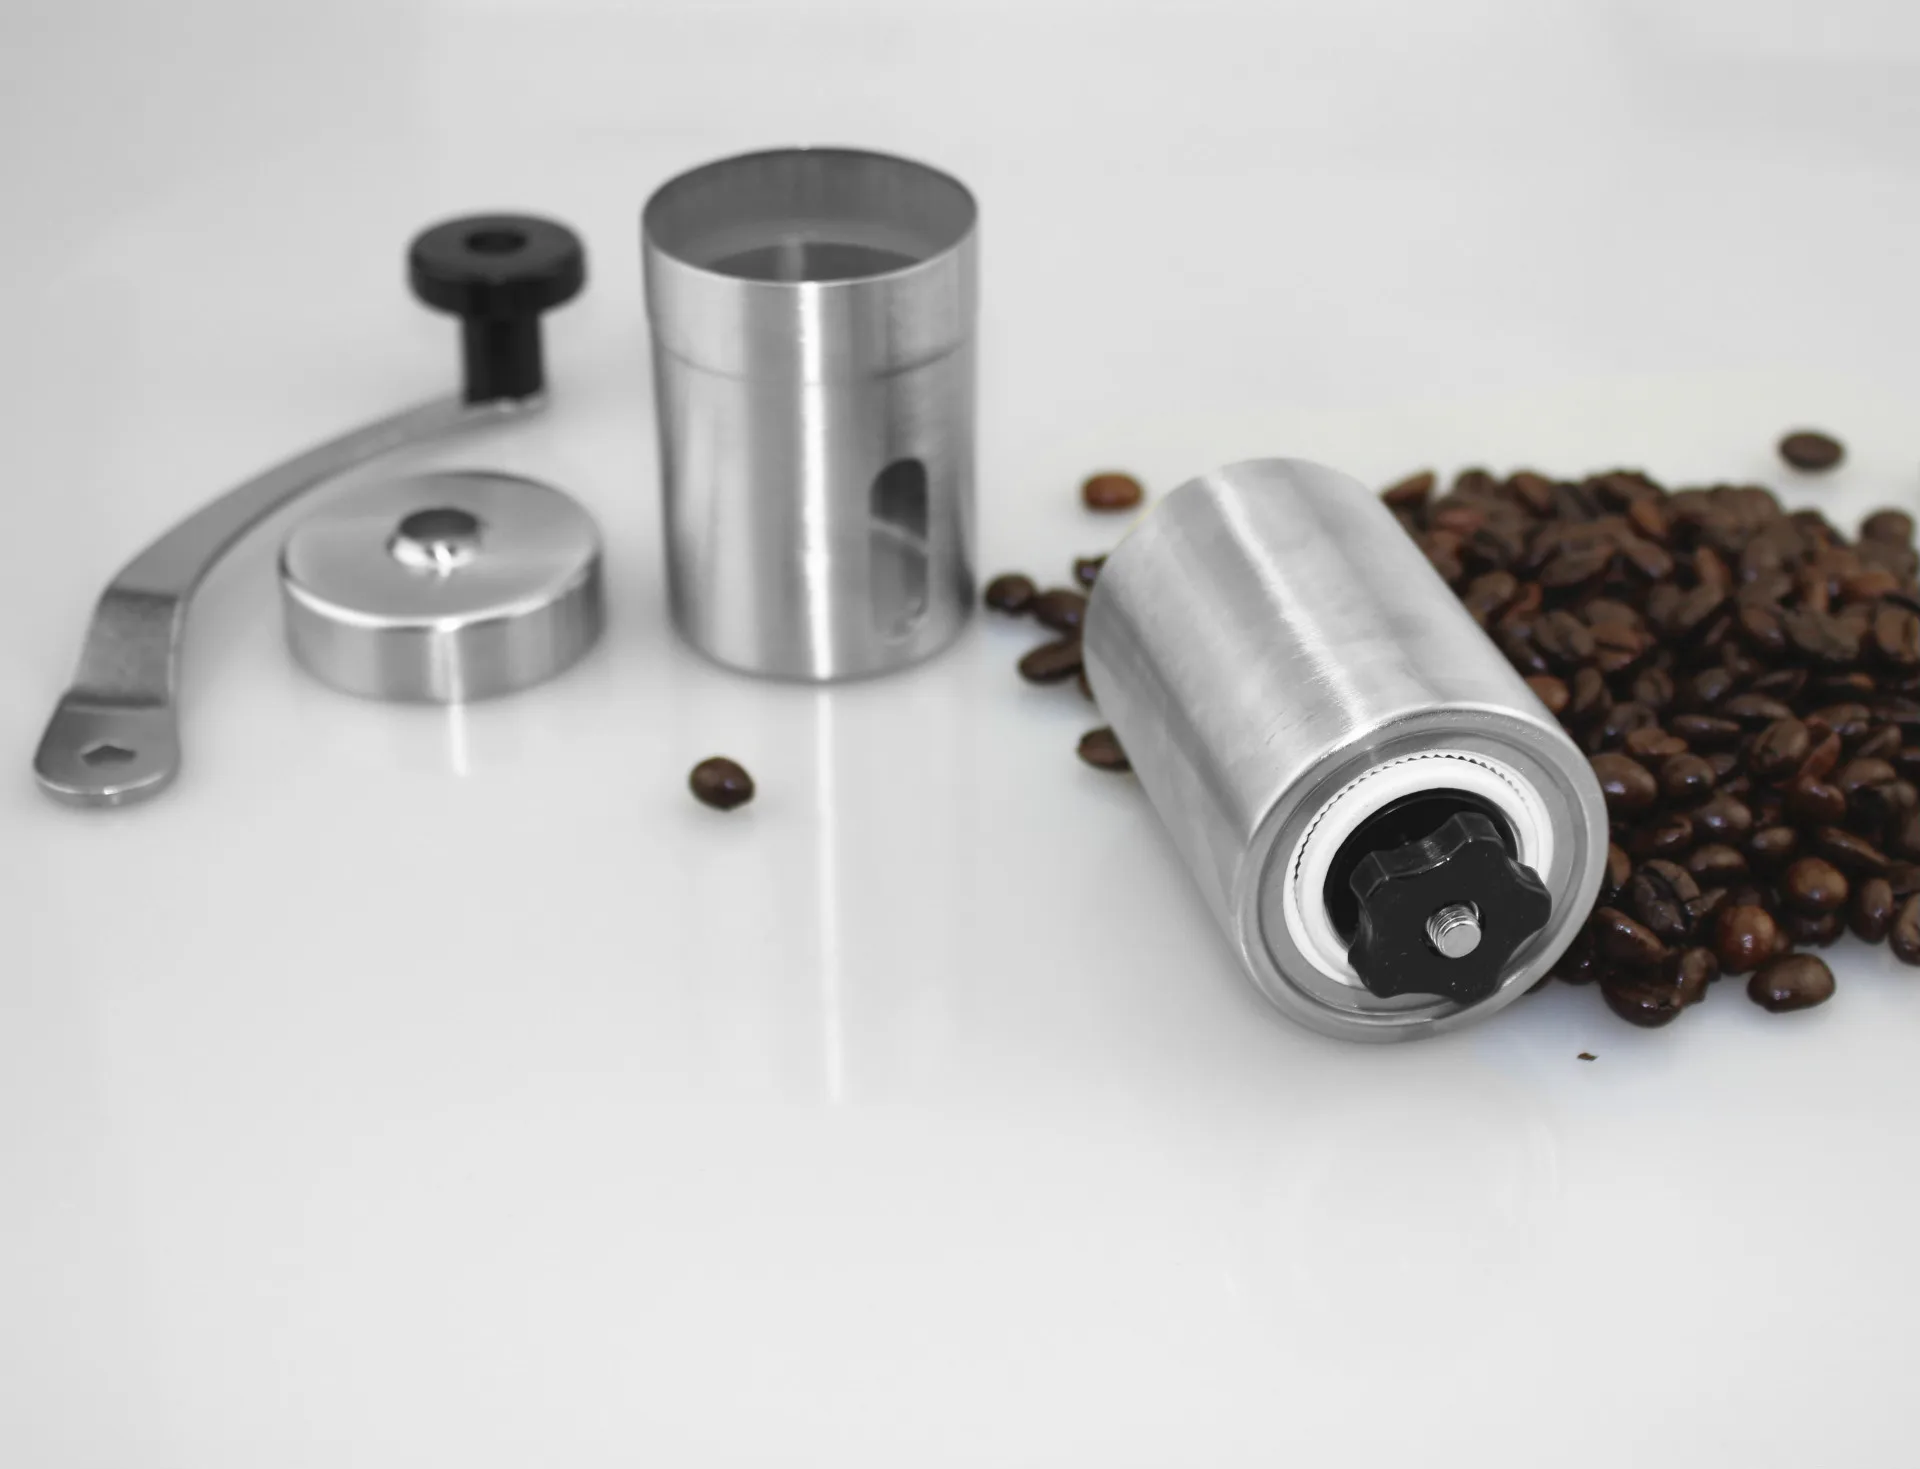 Manual Coffee Bean Hand Grinder Stainless Steel Comercial Adjustable Setting Burr Coffee Grinder